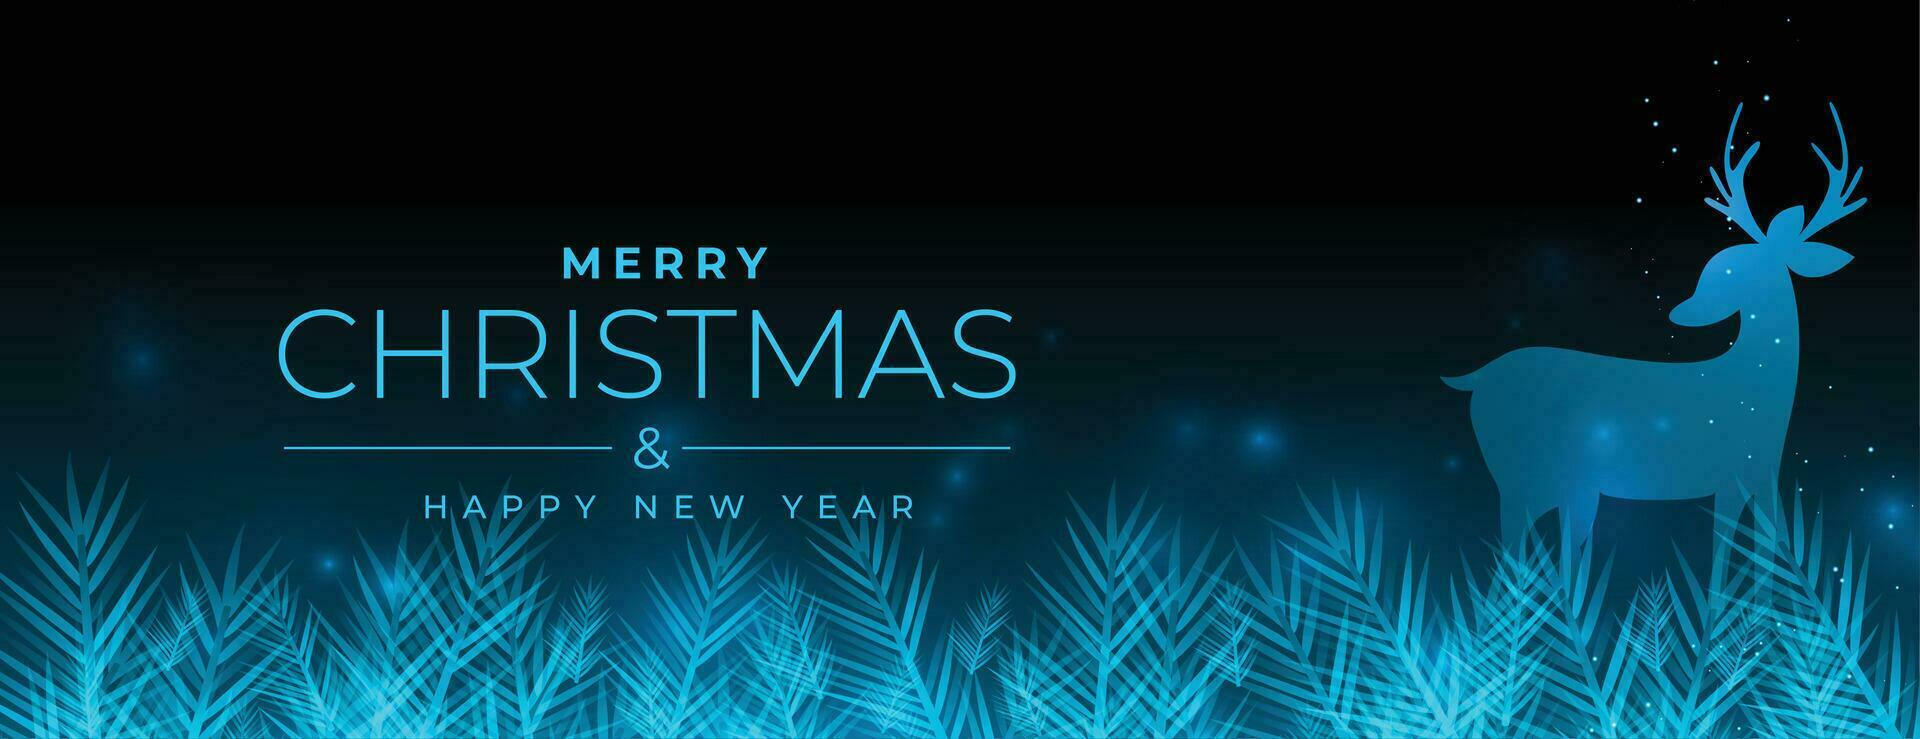 merry christmas and new year banner with deer and grass vector